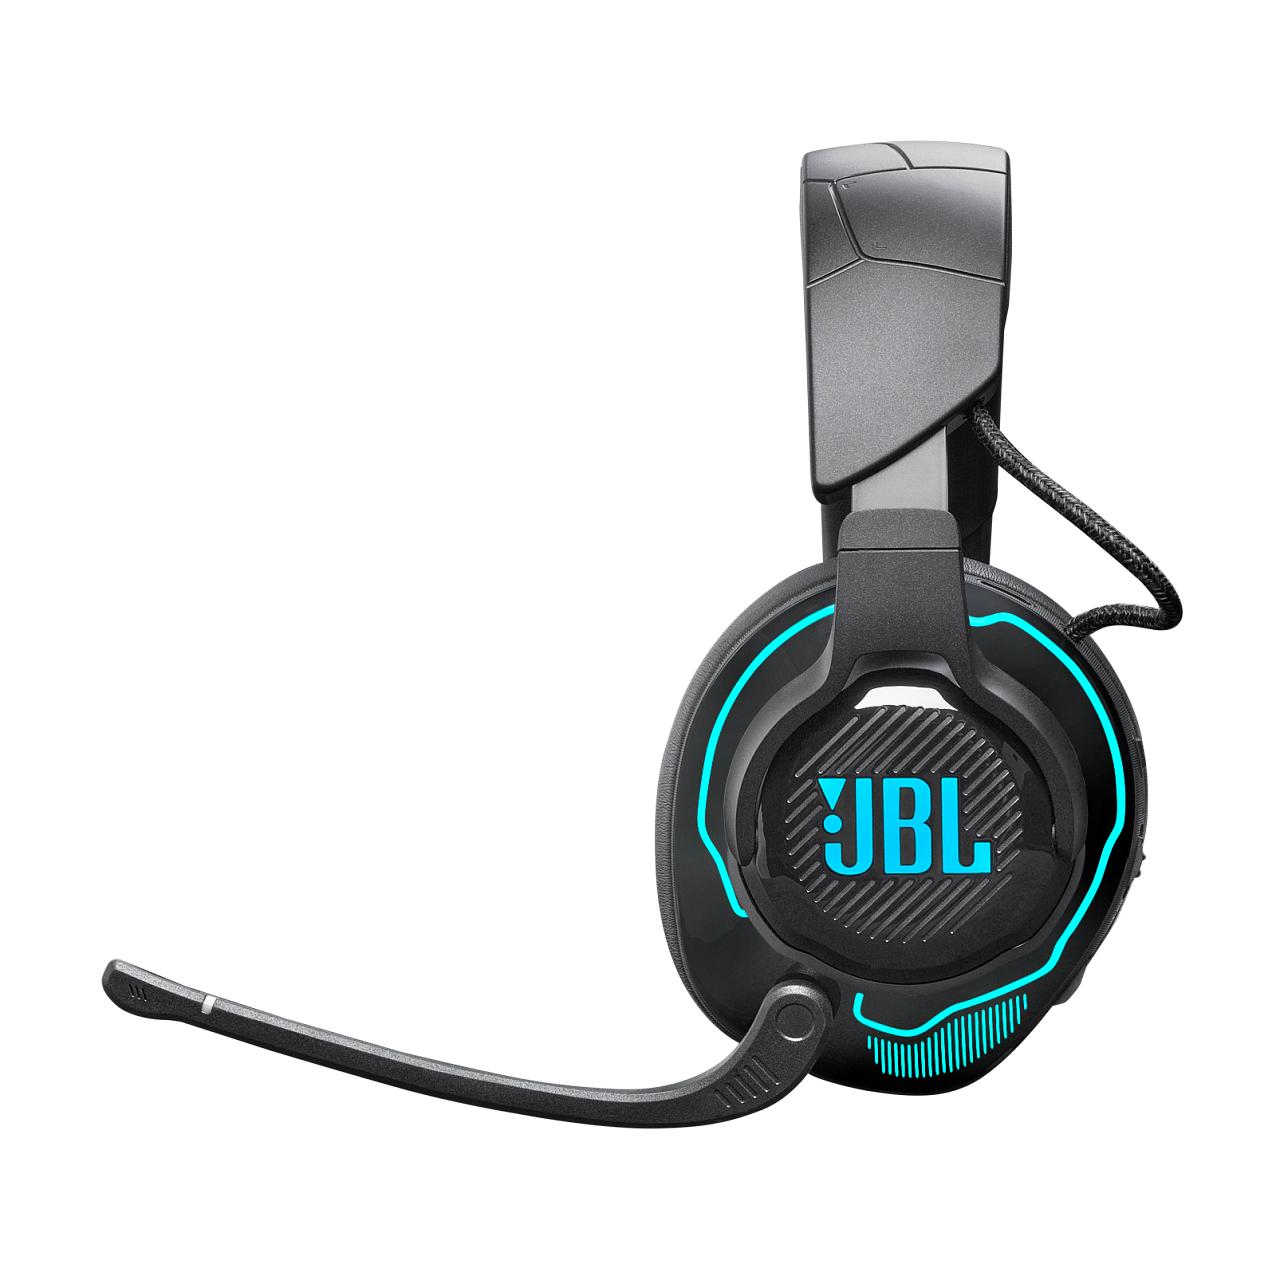 JBL Quantum für Headset XBOX, Gaming Handy, 910 Bluetooth und Switch PS4/PS5, Headset Black PC, Over-ear